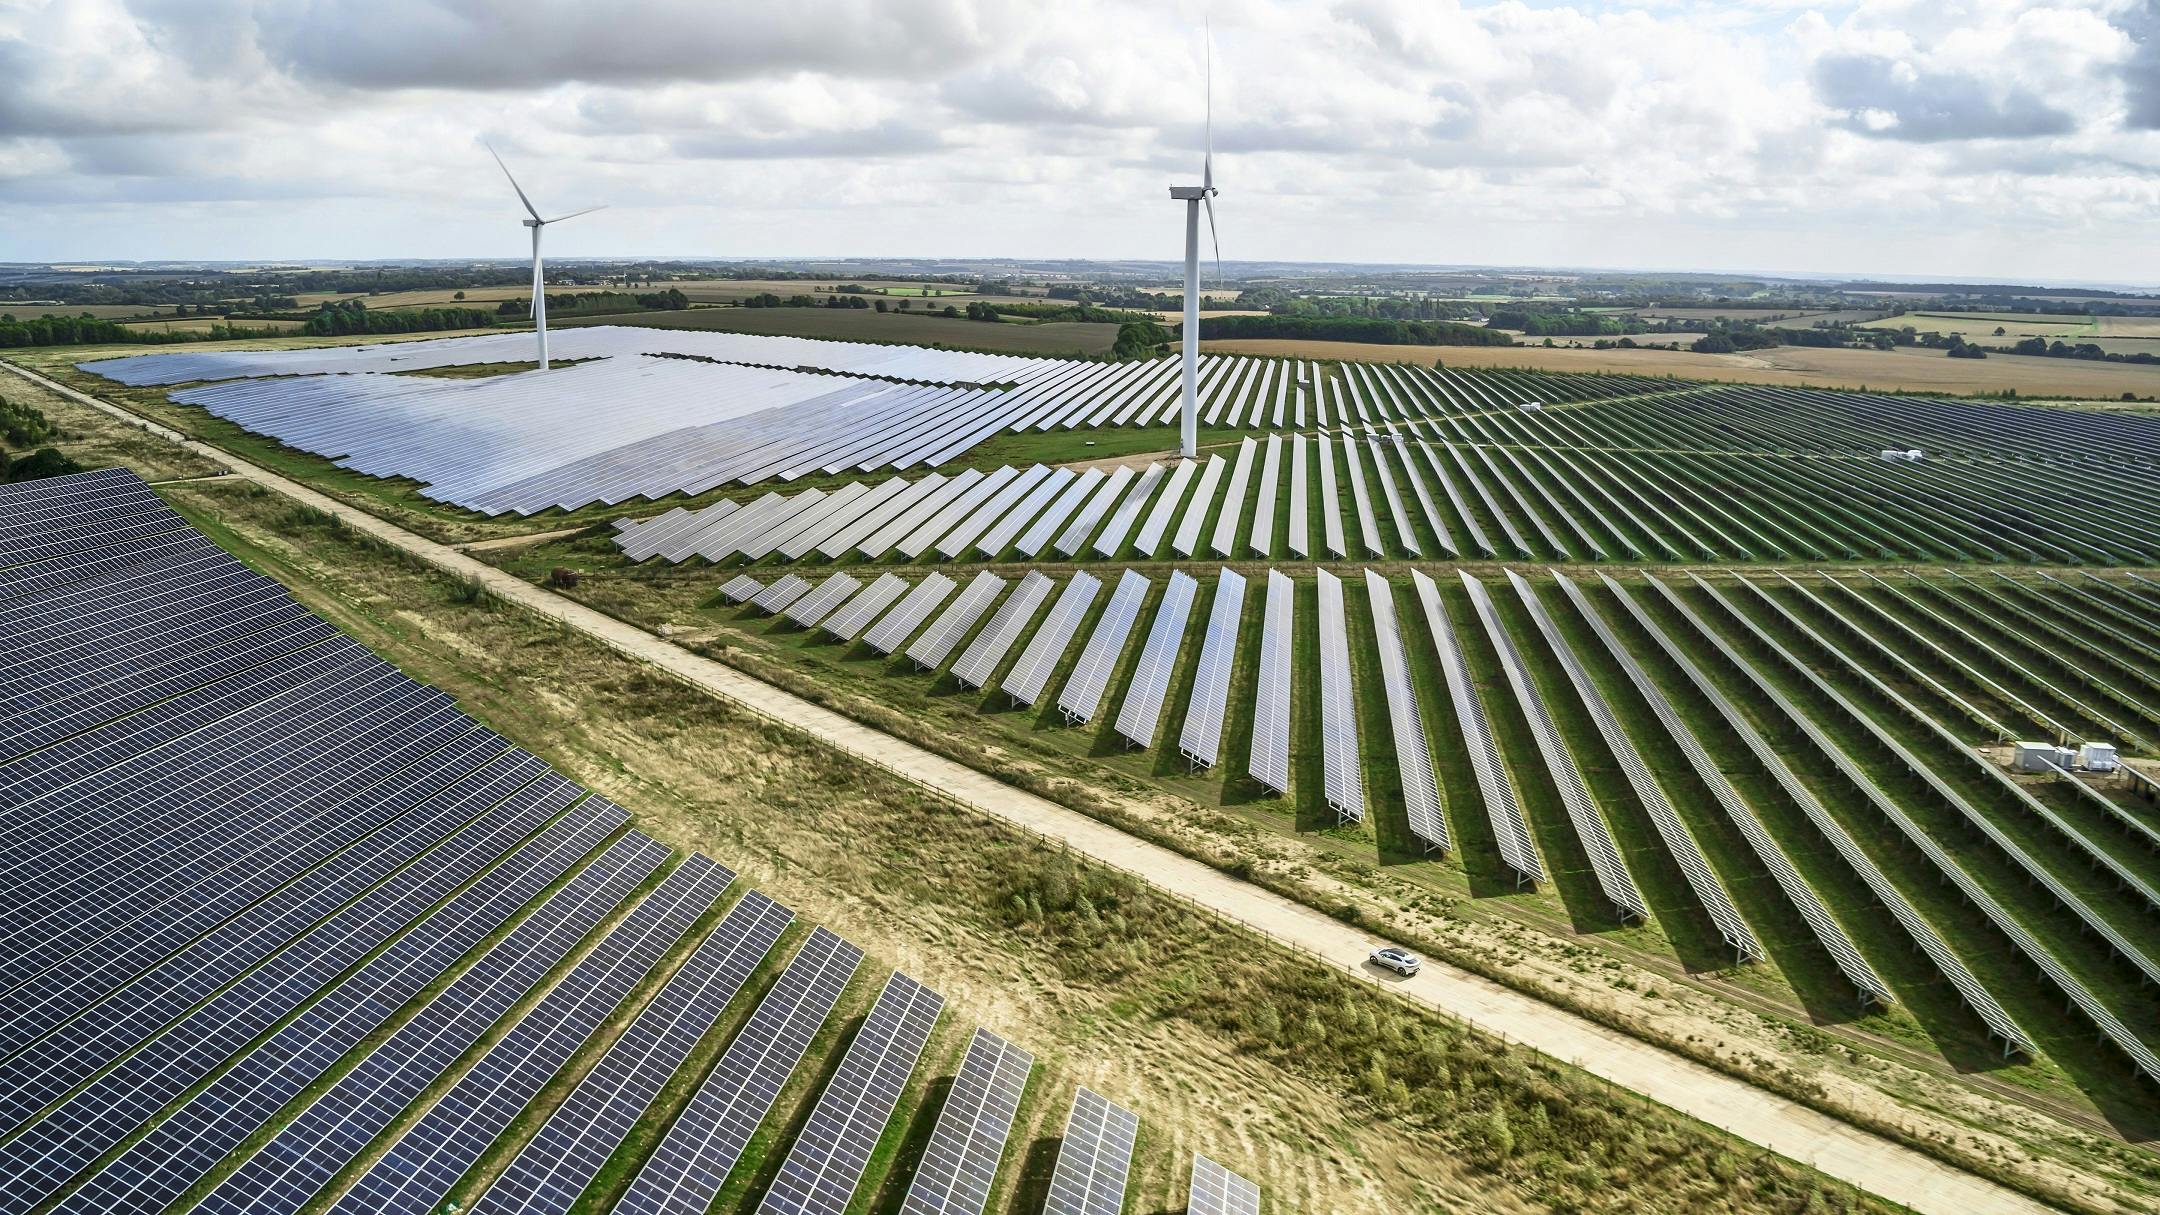 JLR and Wykes Engineering solar and wind power park